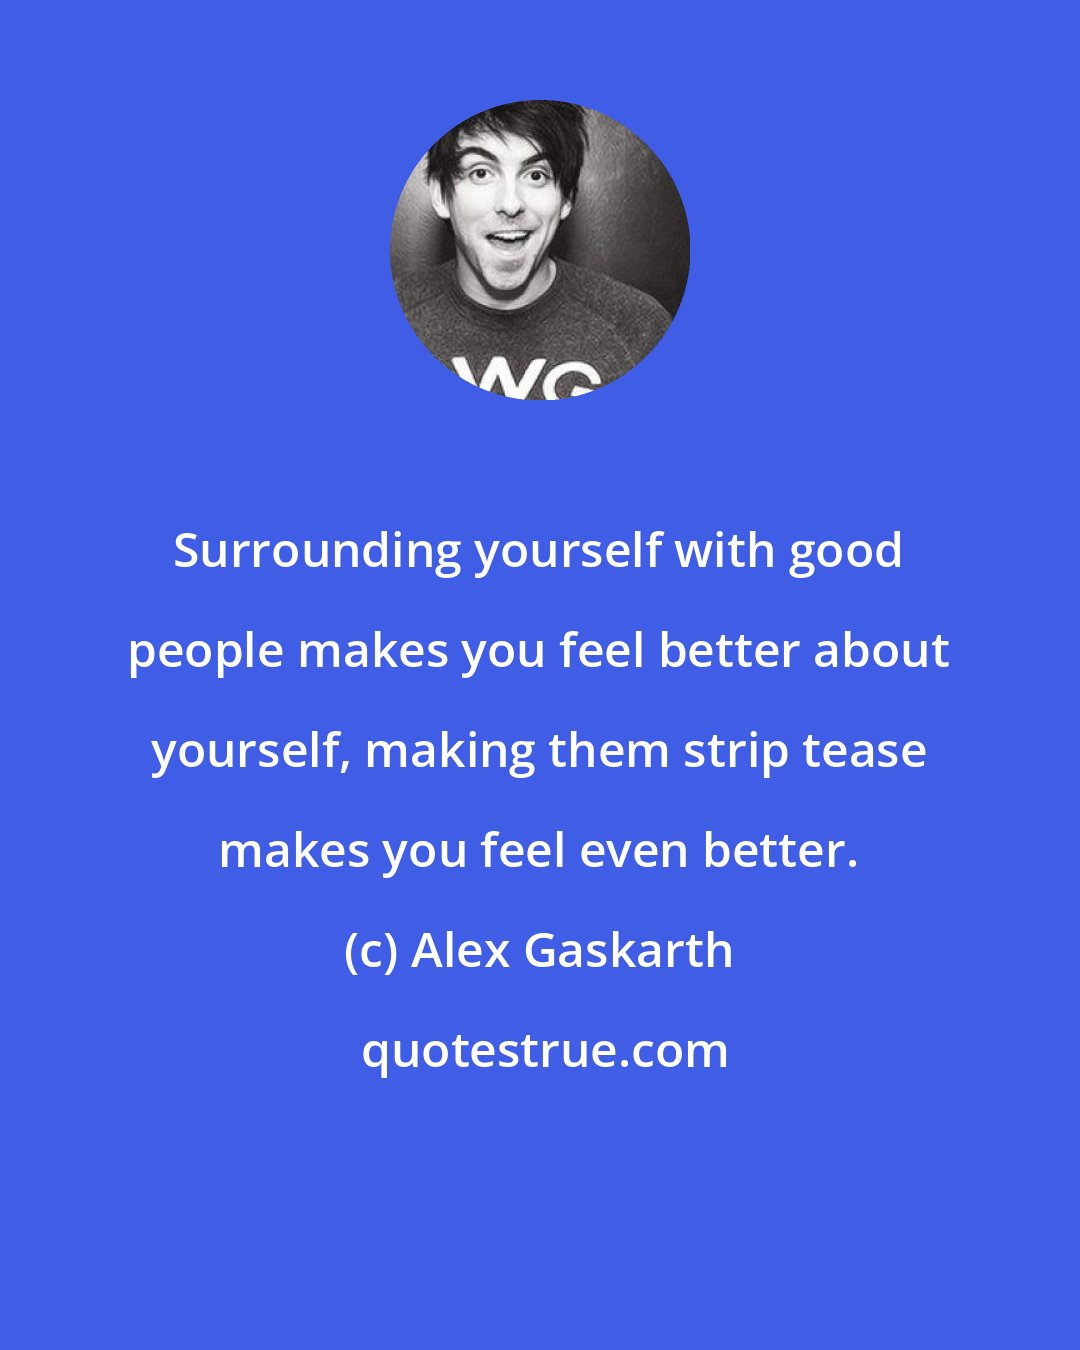 Alex Gaskarth: Surrounding yourself with good people makes you feel better about yourself, making them strip tease makes you feel even better.